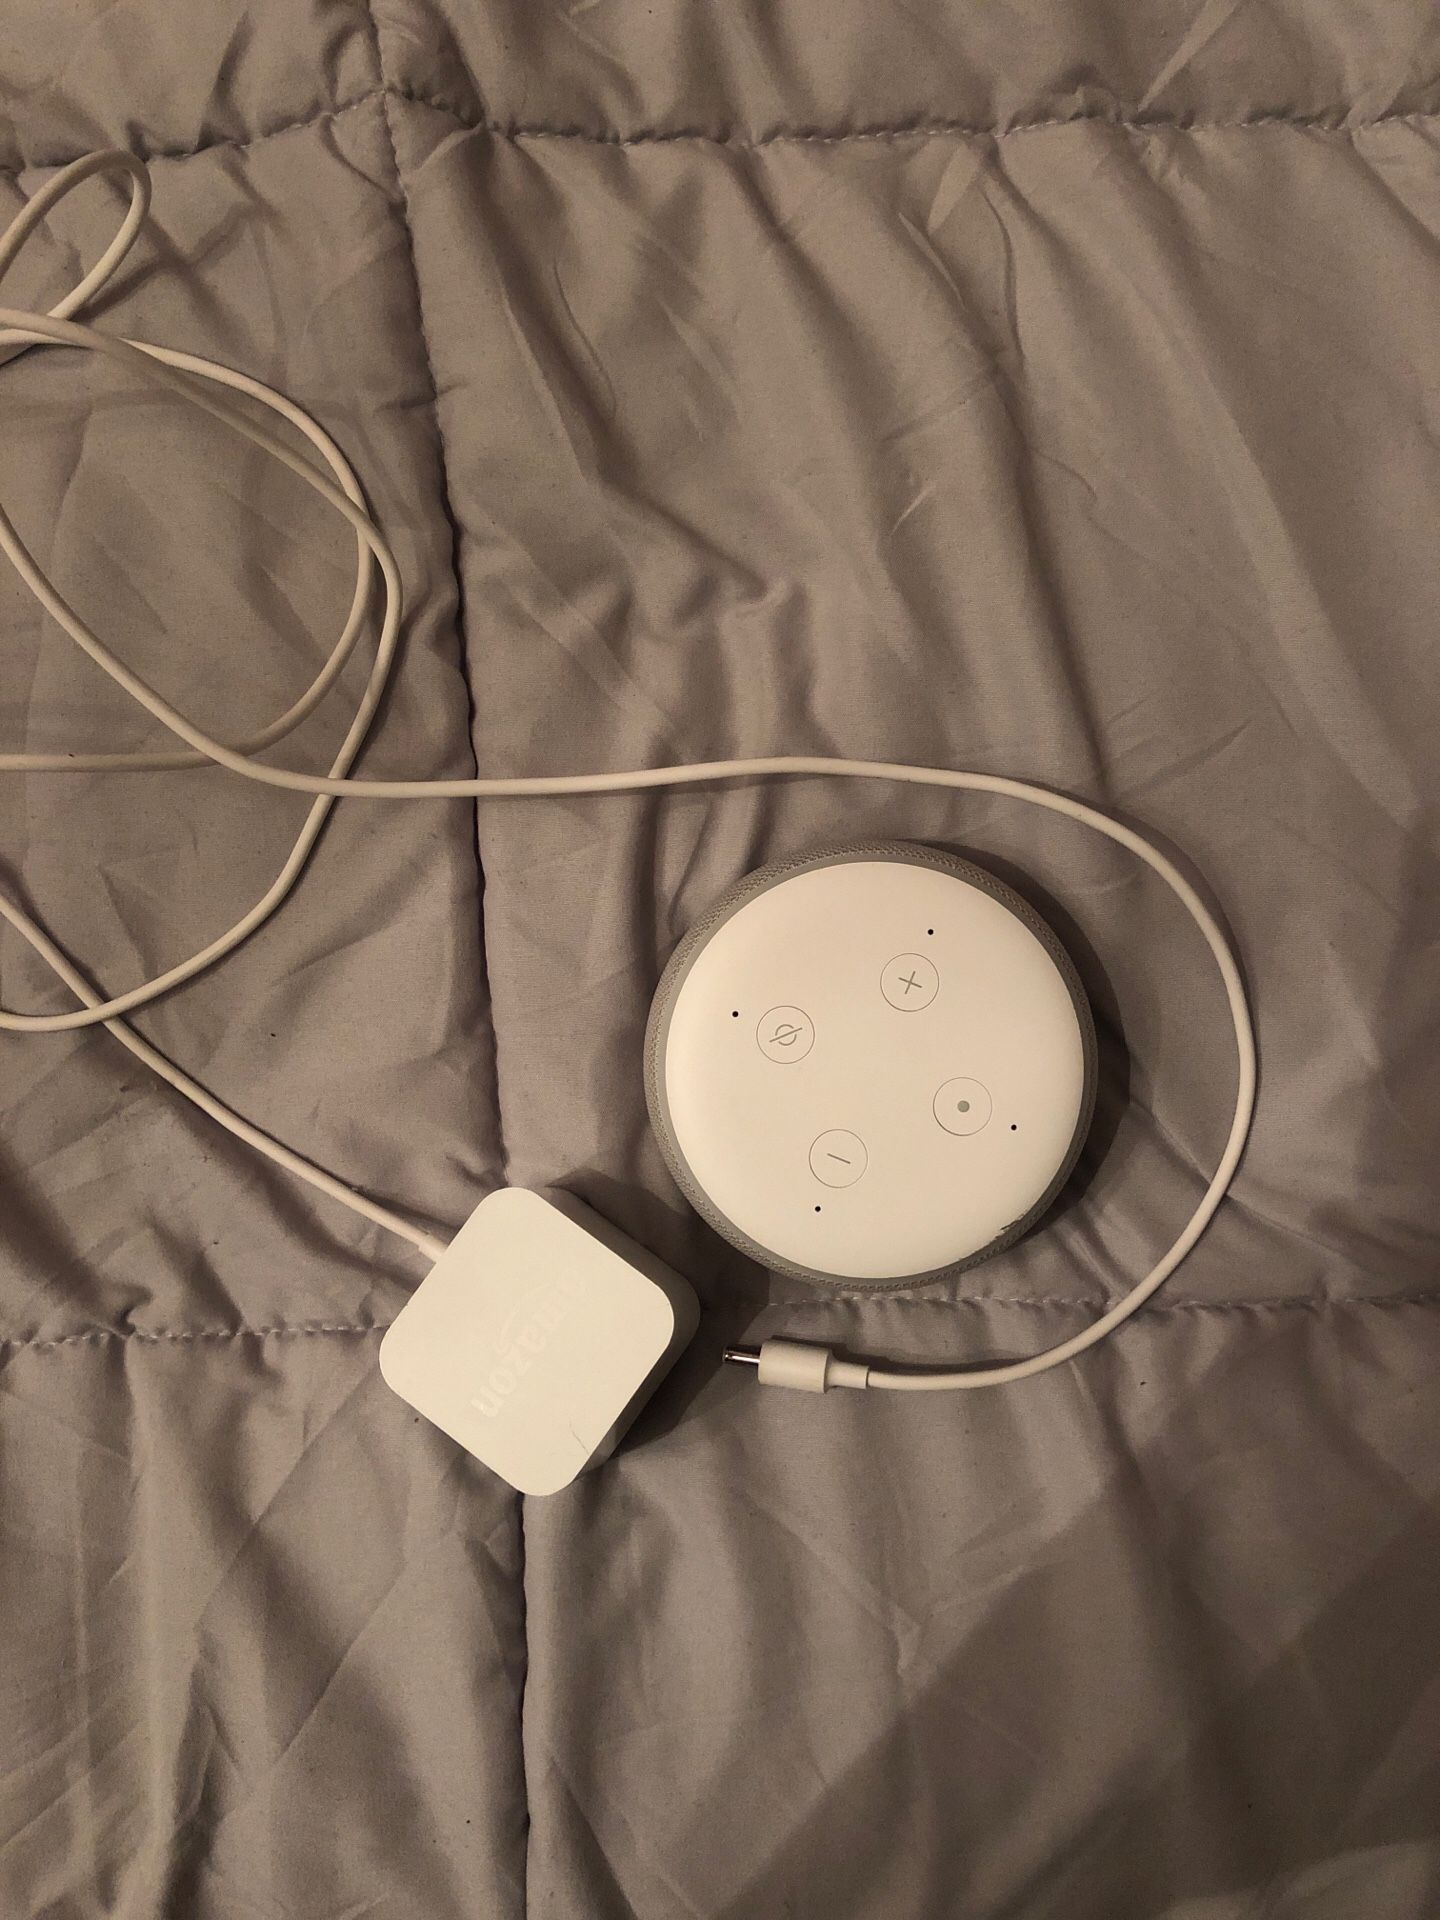 Brand new Alexa Dot and charging cable. Never used